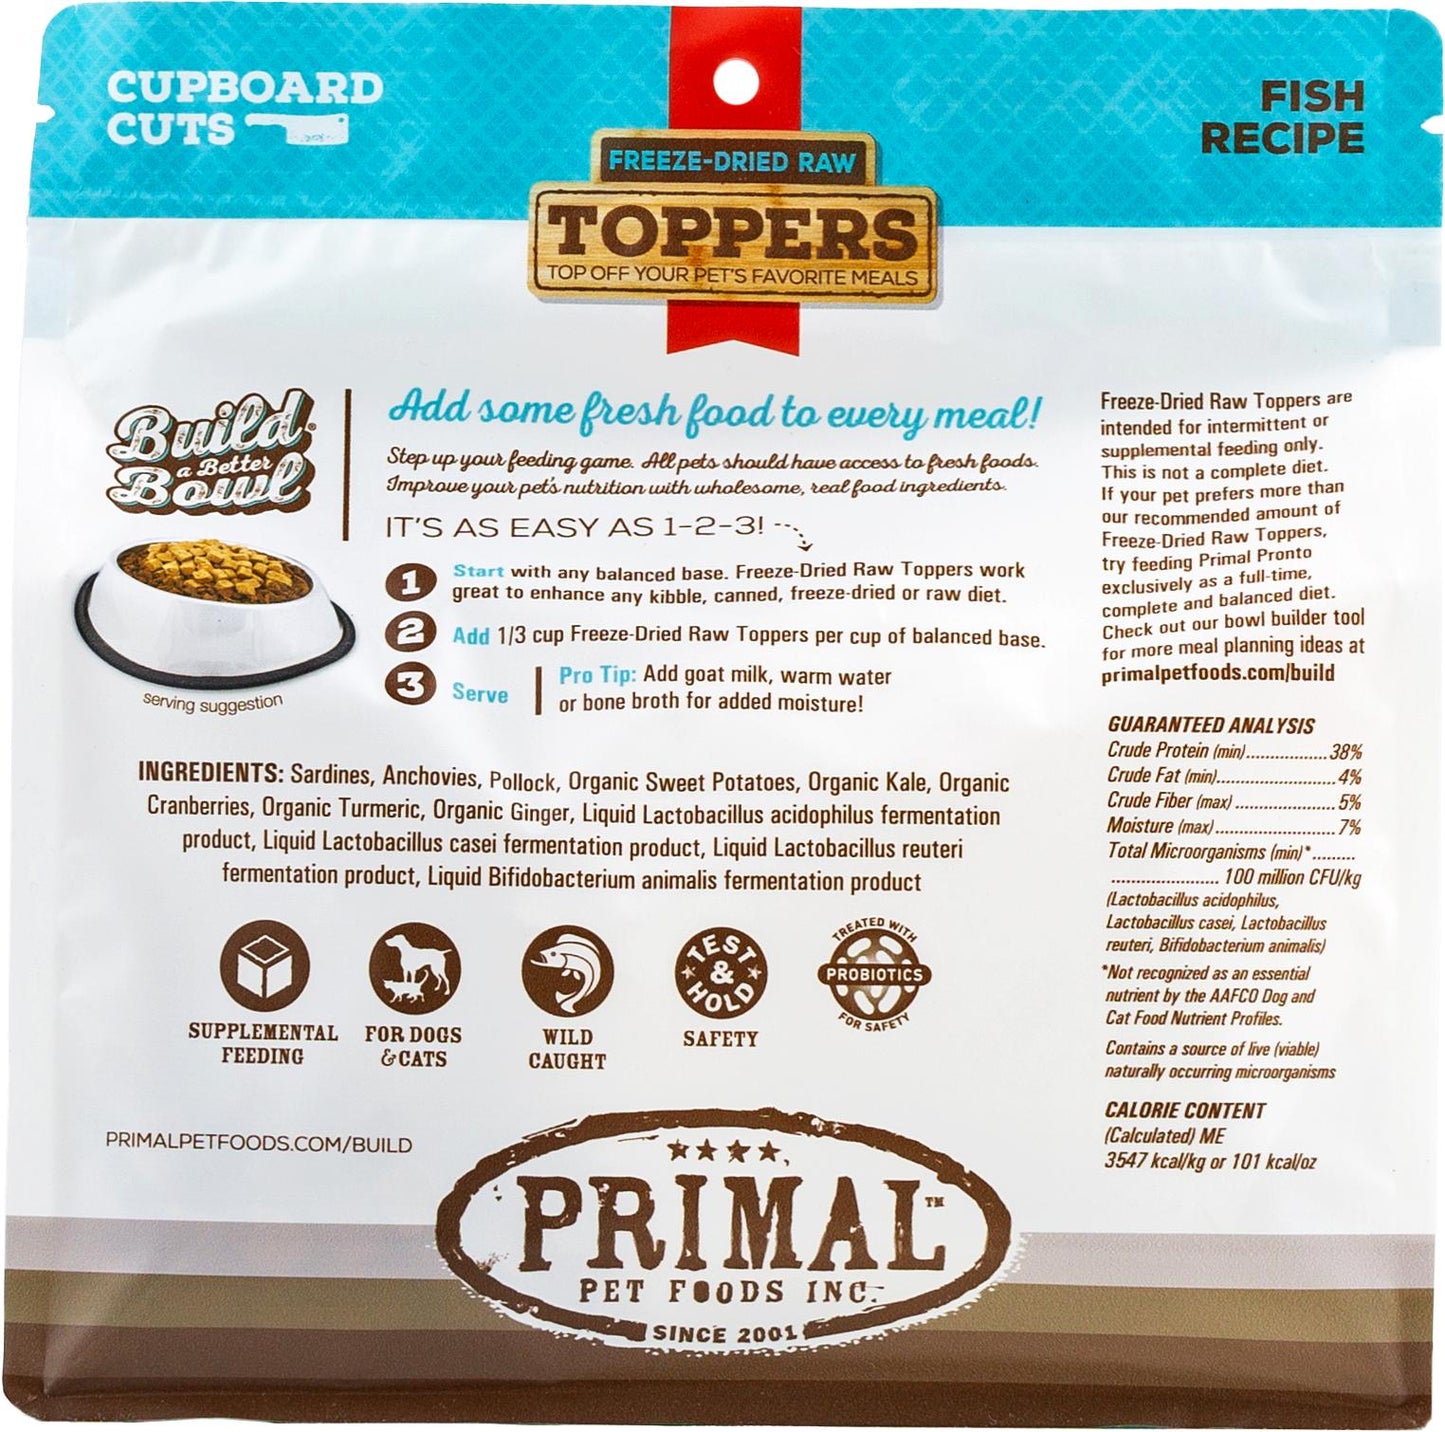 Primal Toppers Fish Freeze-Dried Raw Dog & Cat Food Topper, 3.5-oz (Size: 3.5-oz)